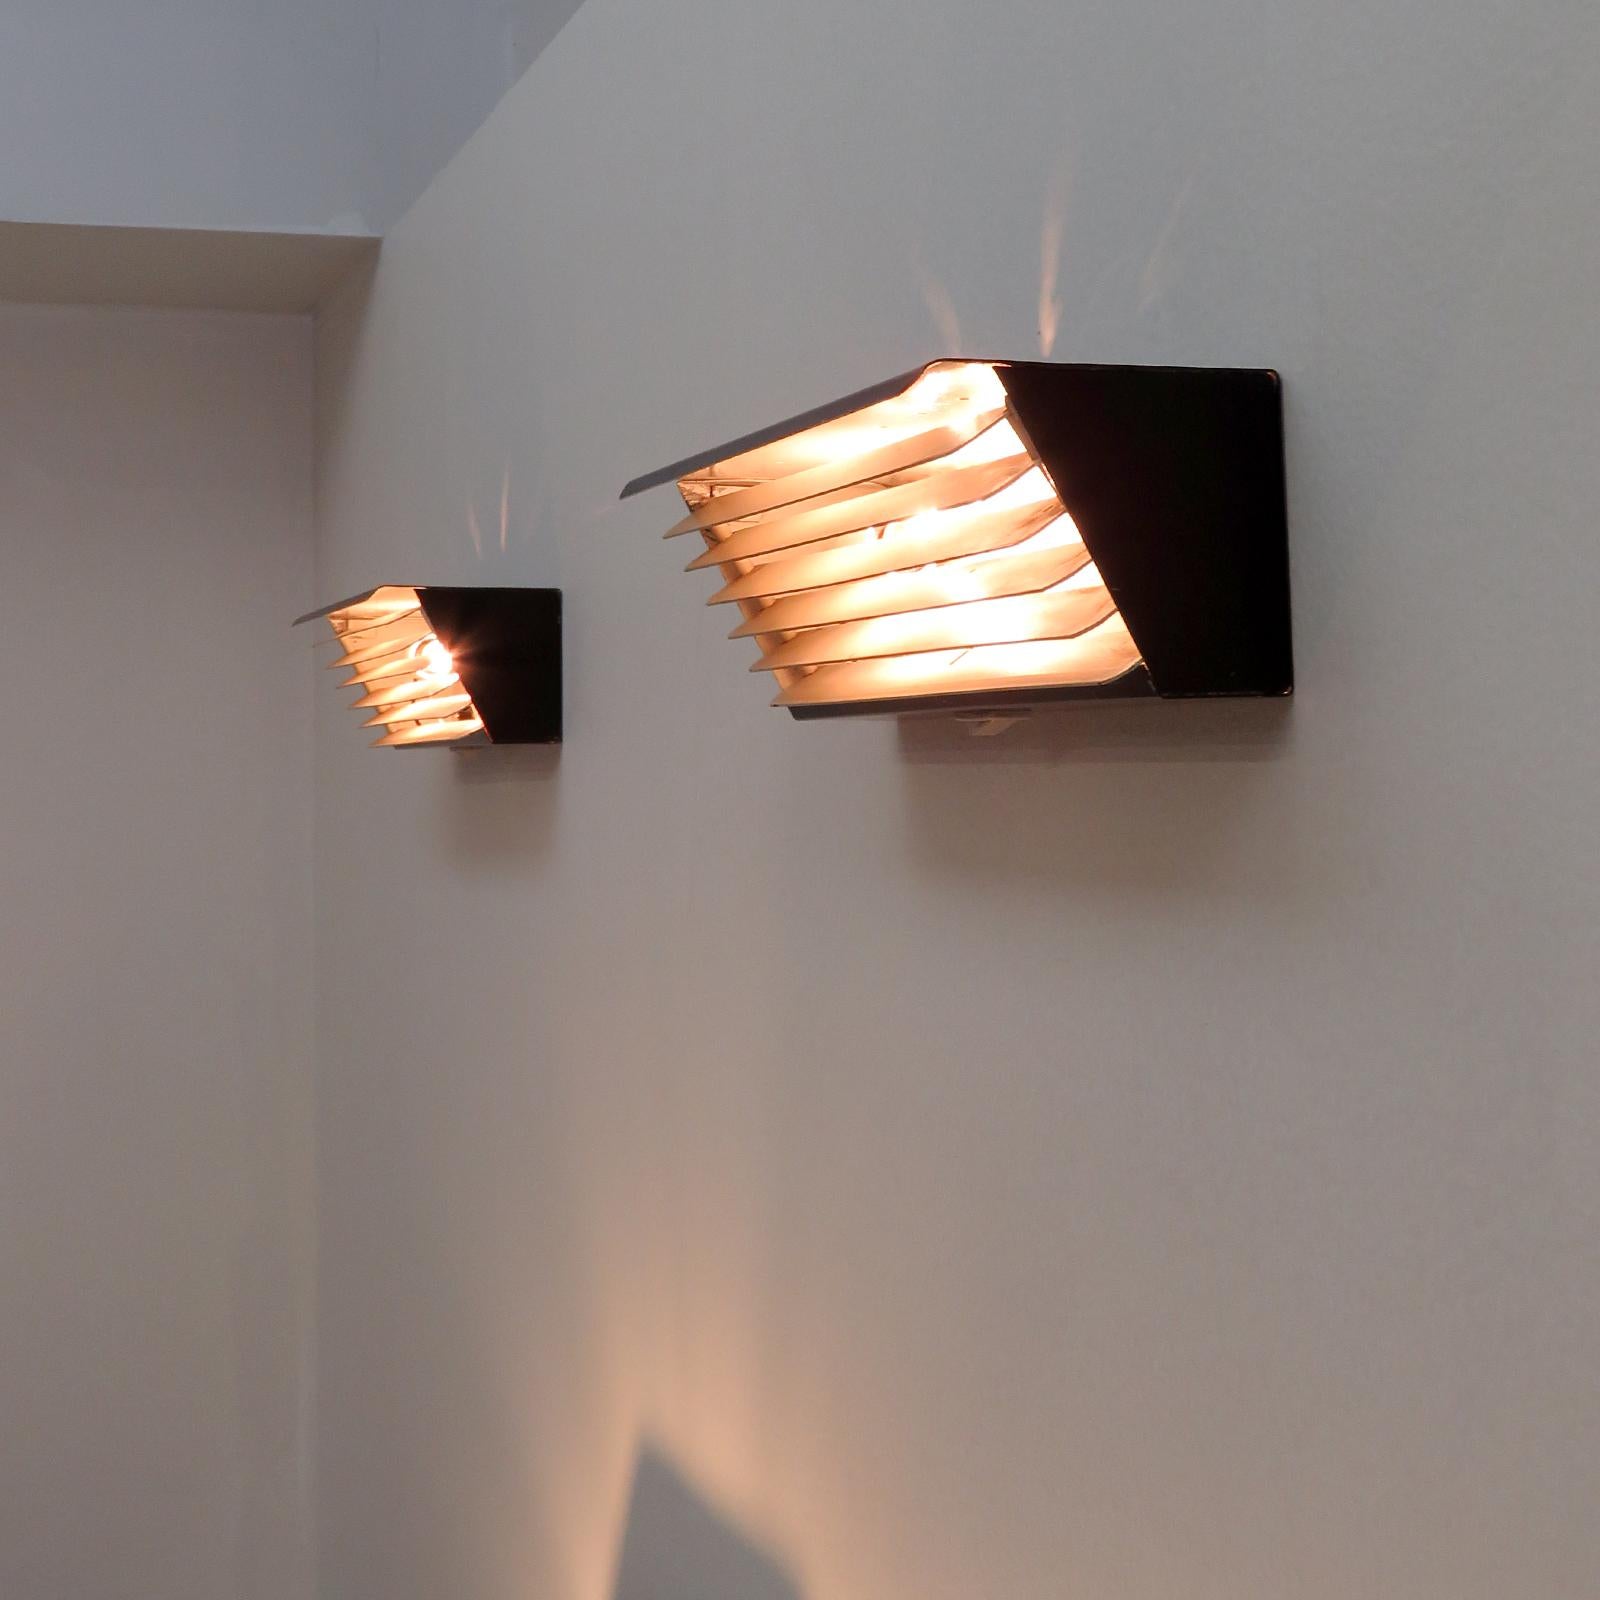 Jacques Biny for Luminalite Edition Model '212' Wall Lights 2